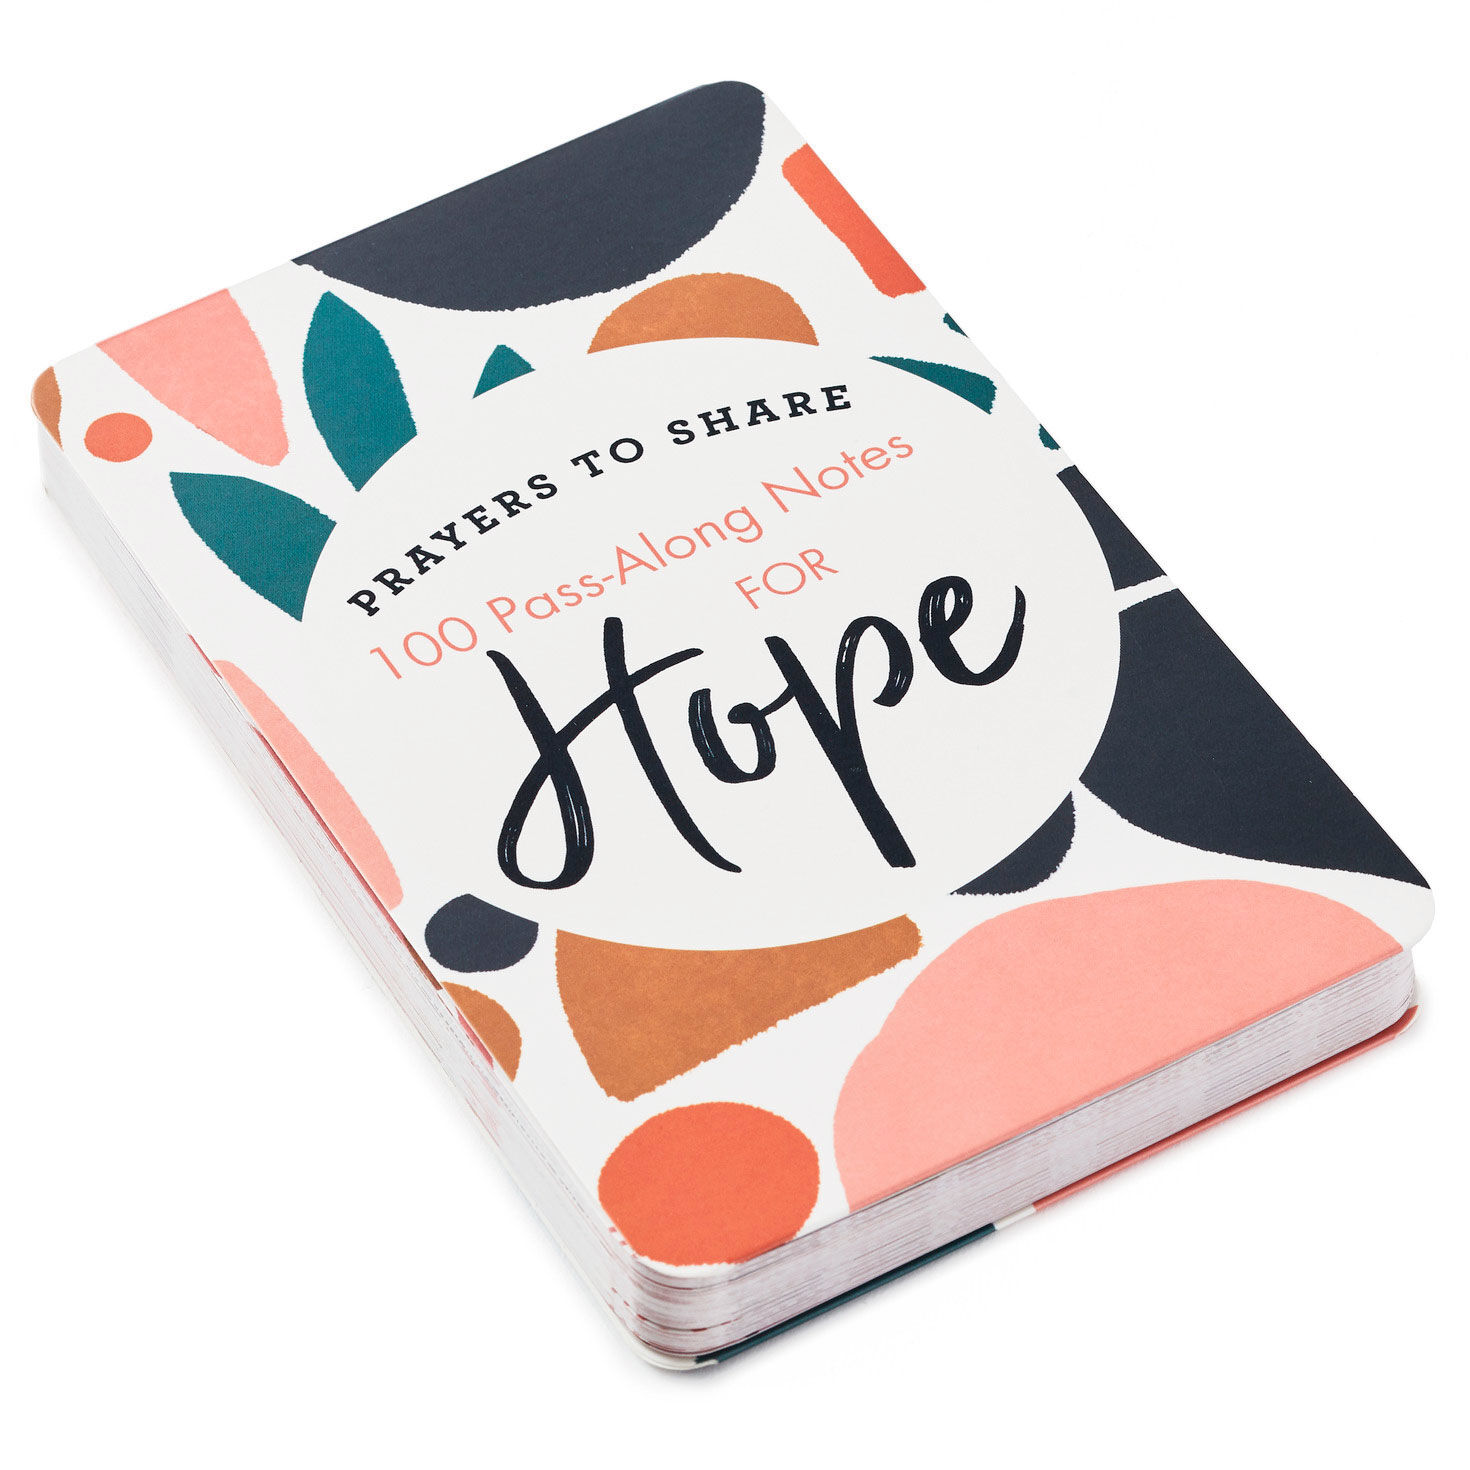 Prayers to Share: 100 Pass-Along Notes for Hope Book for only USD 9.99 | Hallmark